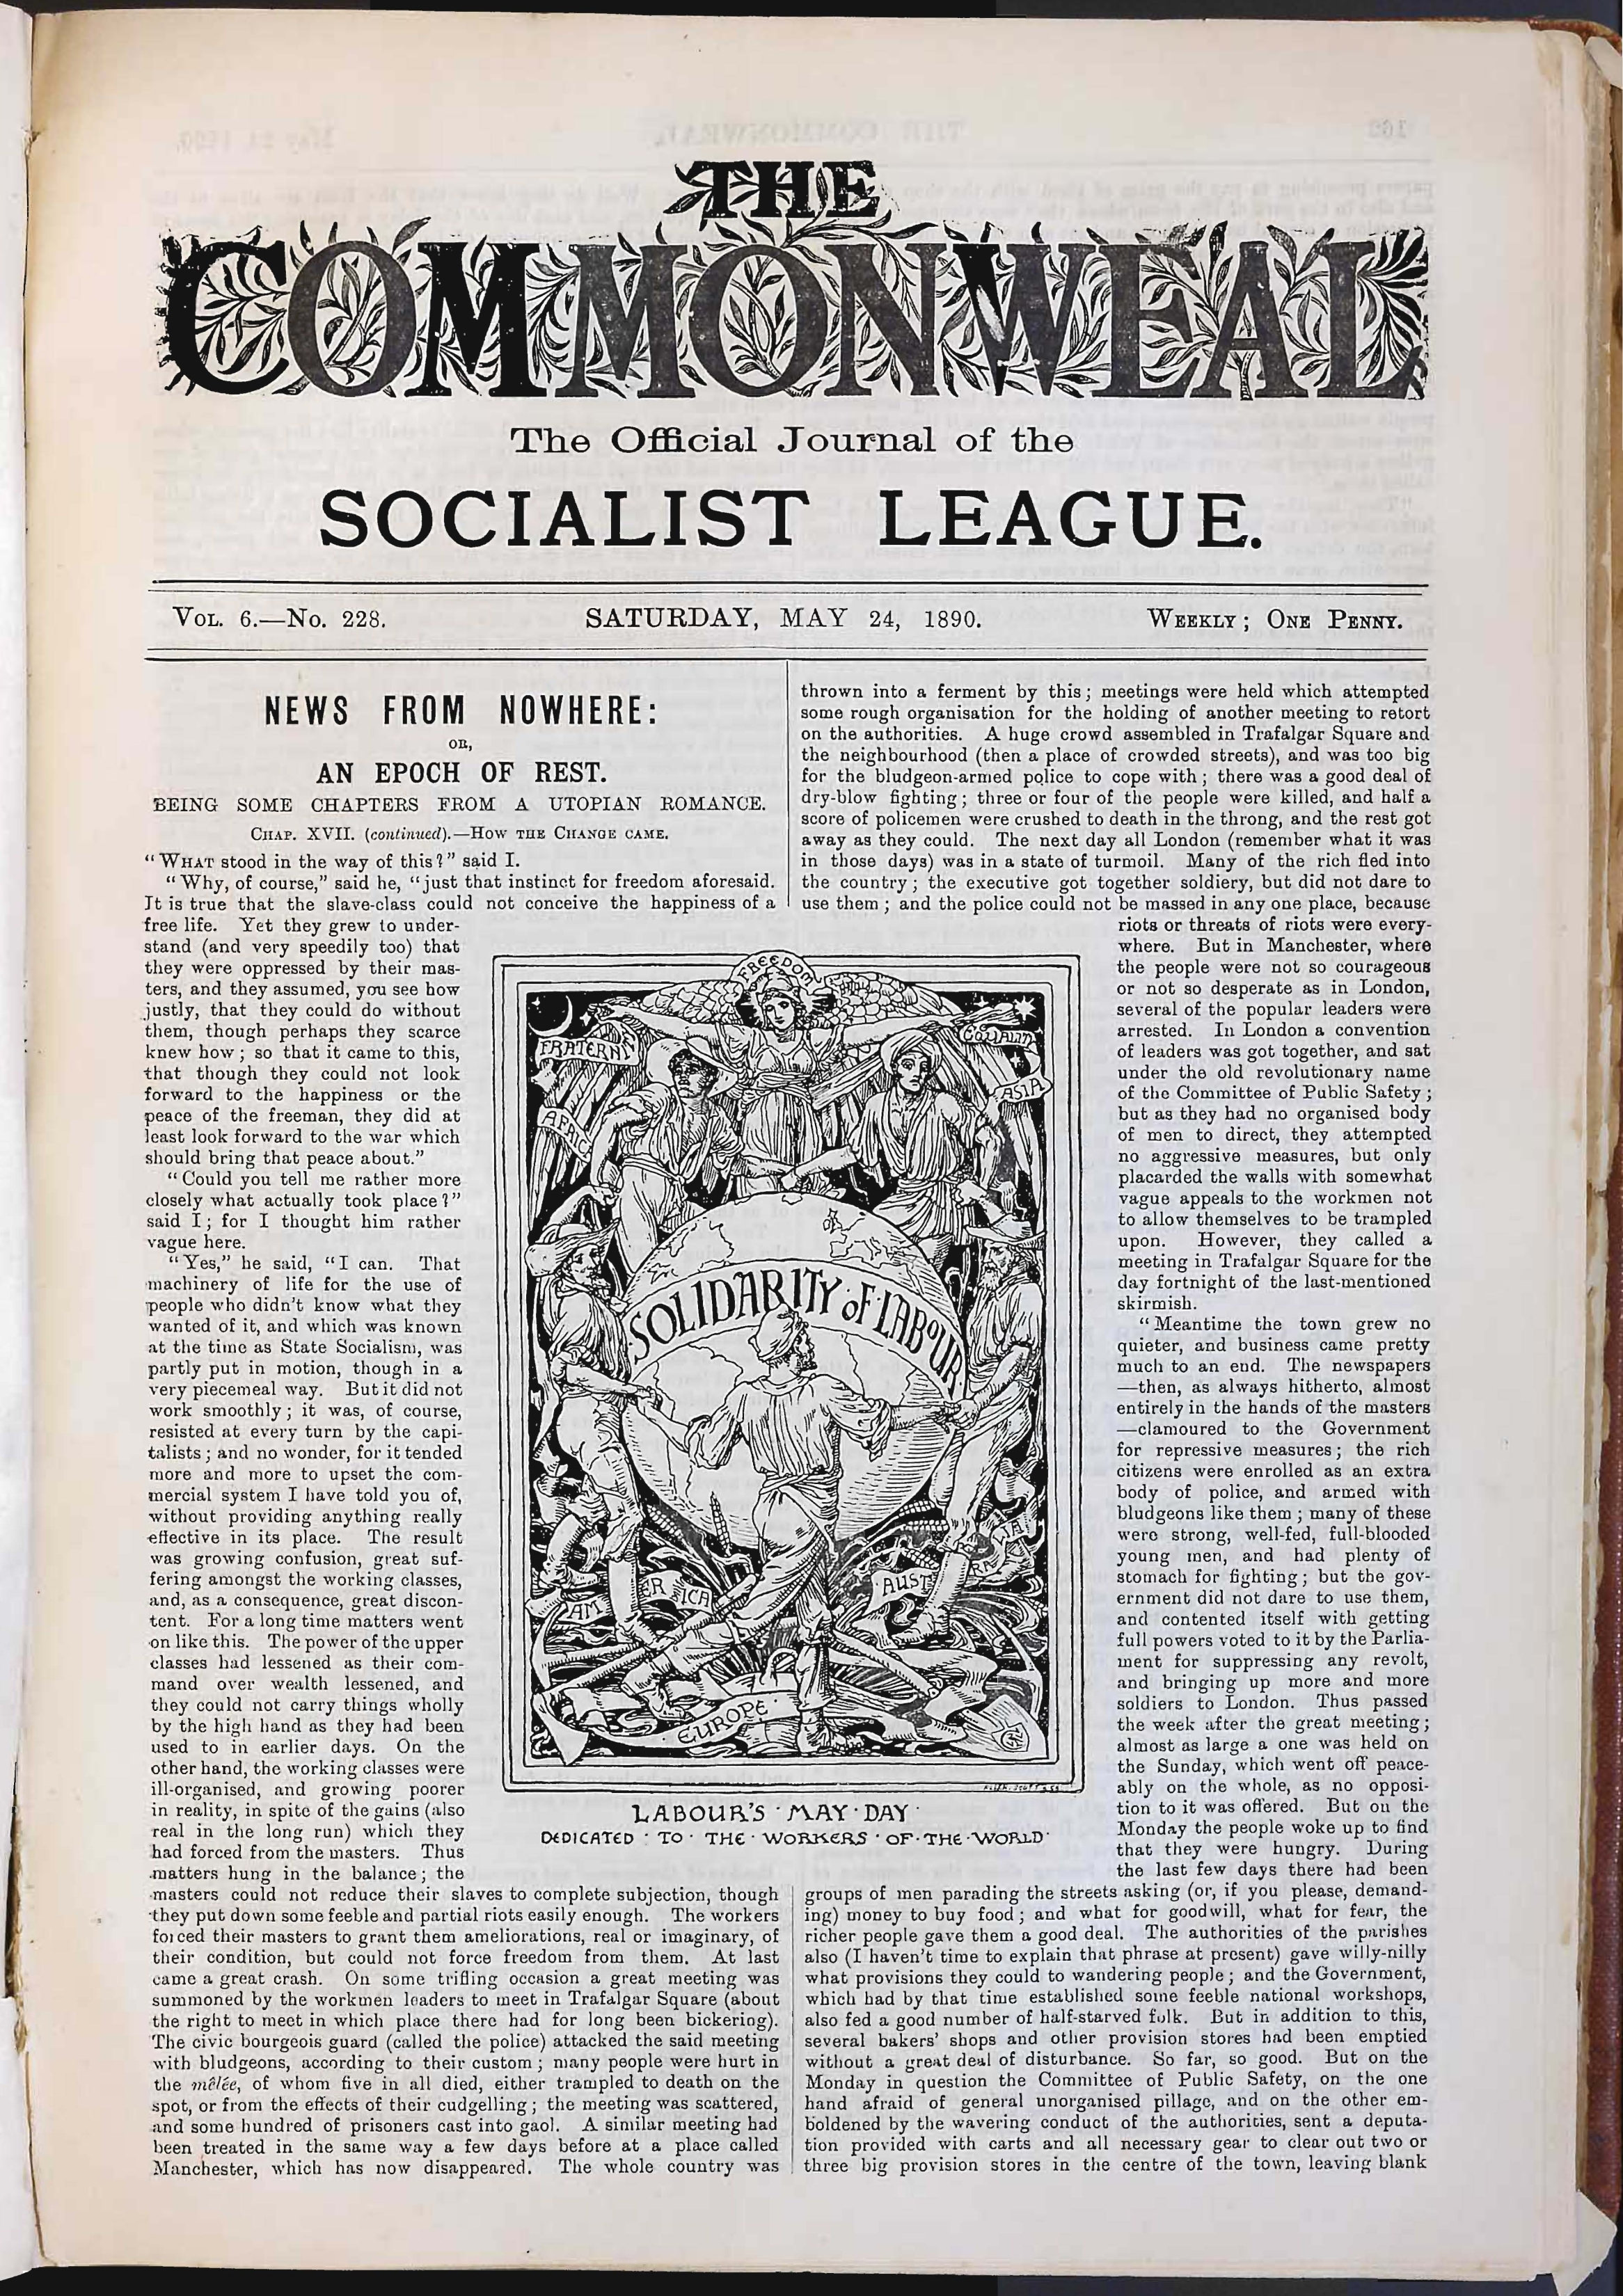 front page featuring Walter Crane’s “Solidarity of Labour: Labour’s May Day, dedicated to the workers of the world”, 1890, 15 × 31 cm. Labadie Collection, University of Michigan